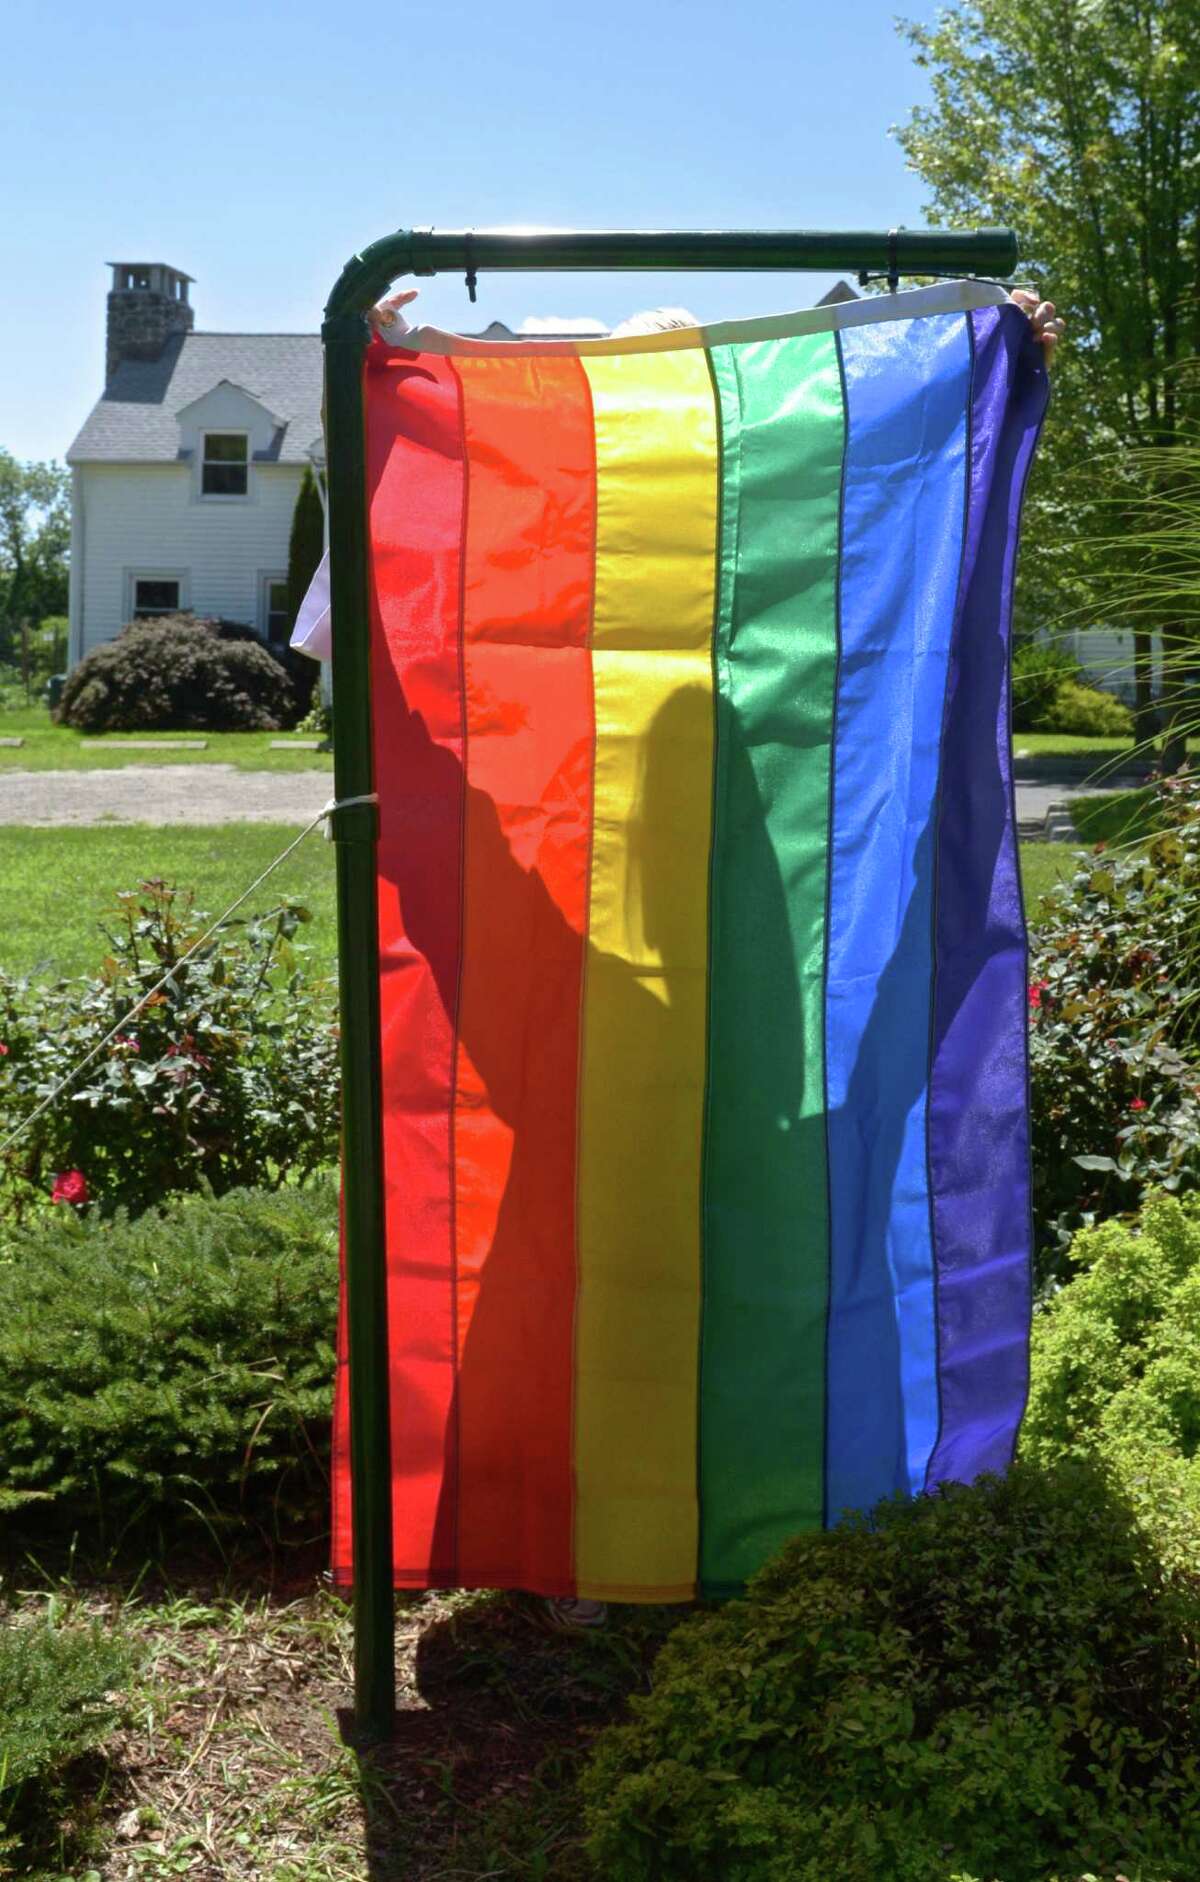 A second rainbow flag was burned this week at Unitarian Universalist Congregation of Danbury.